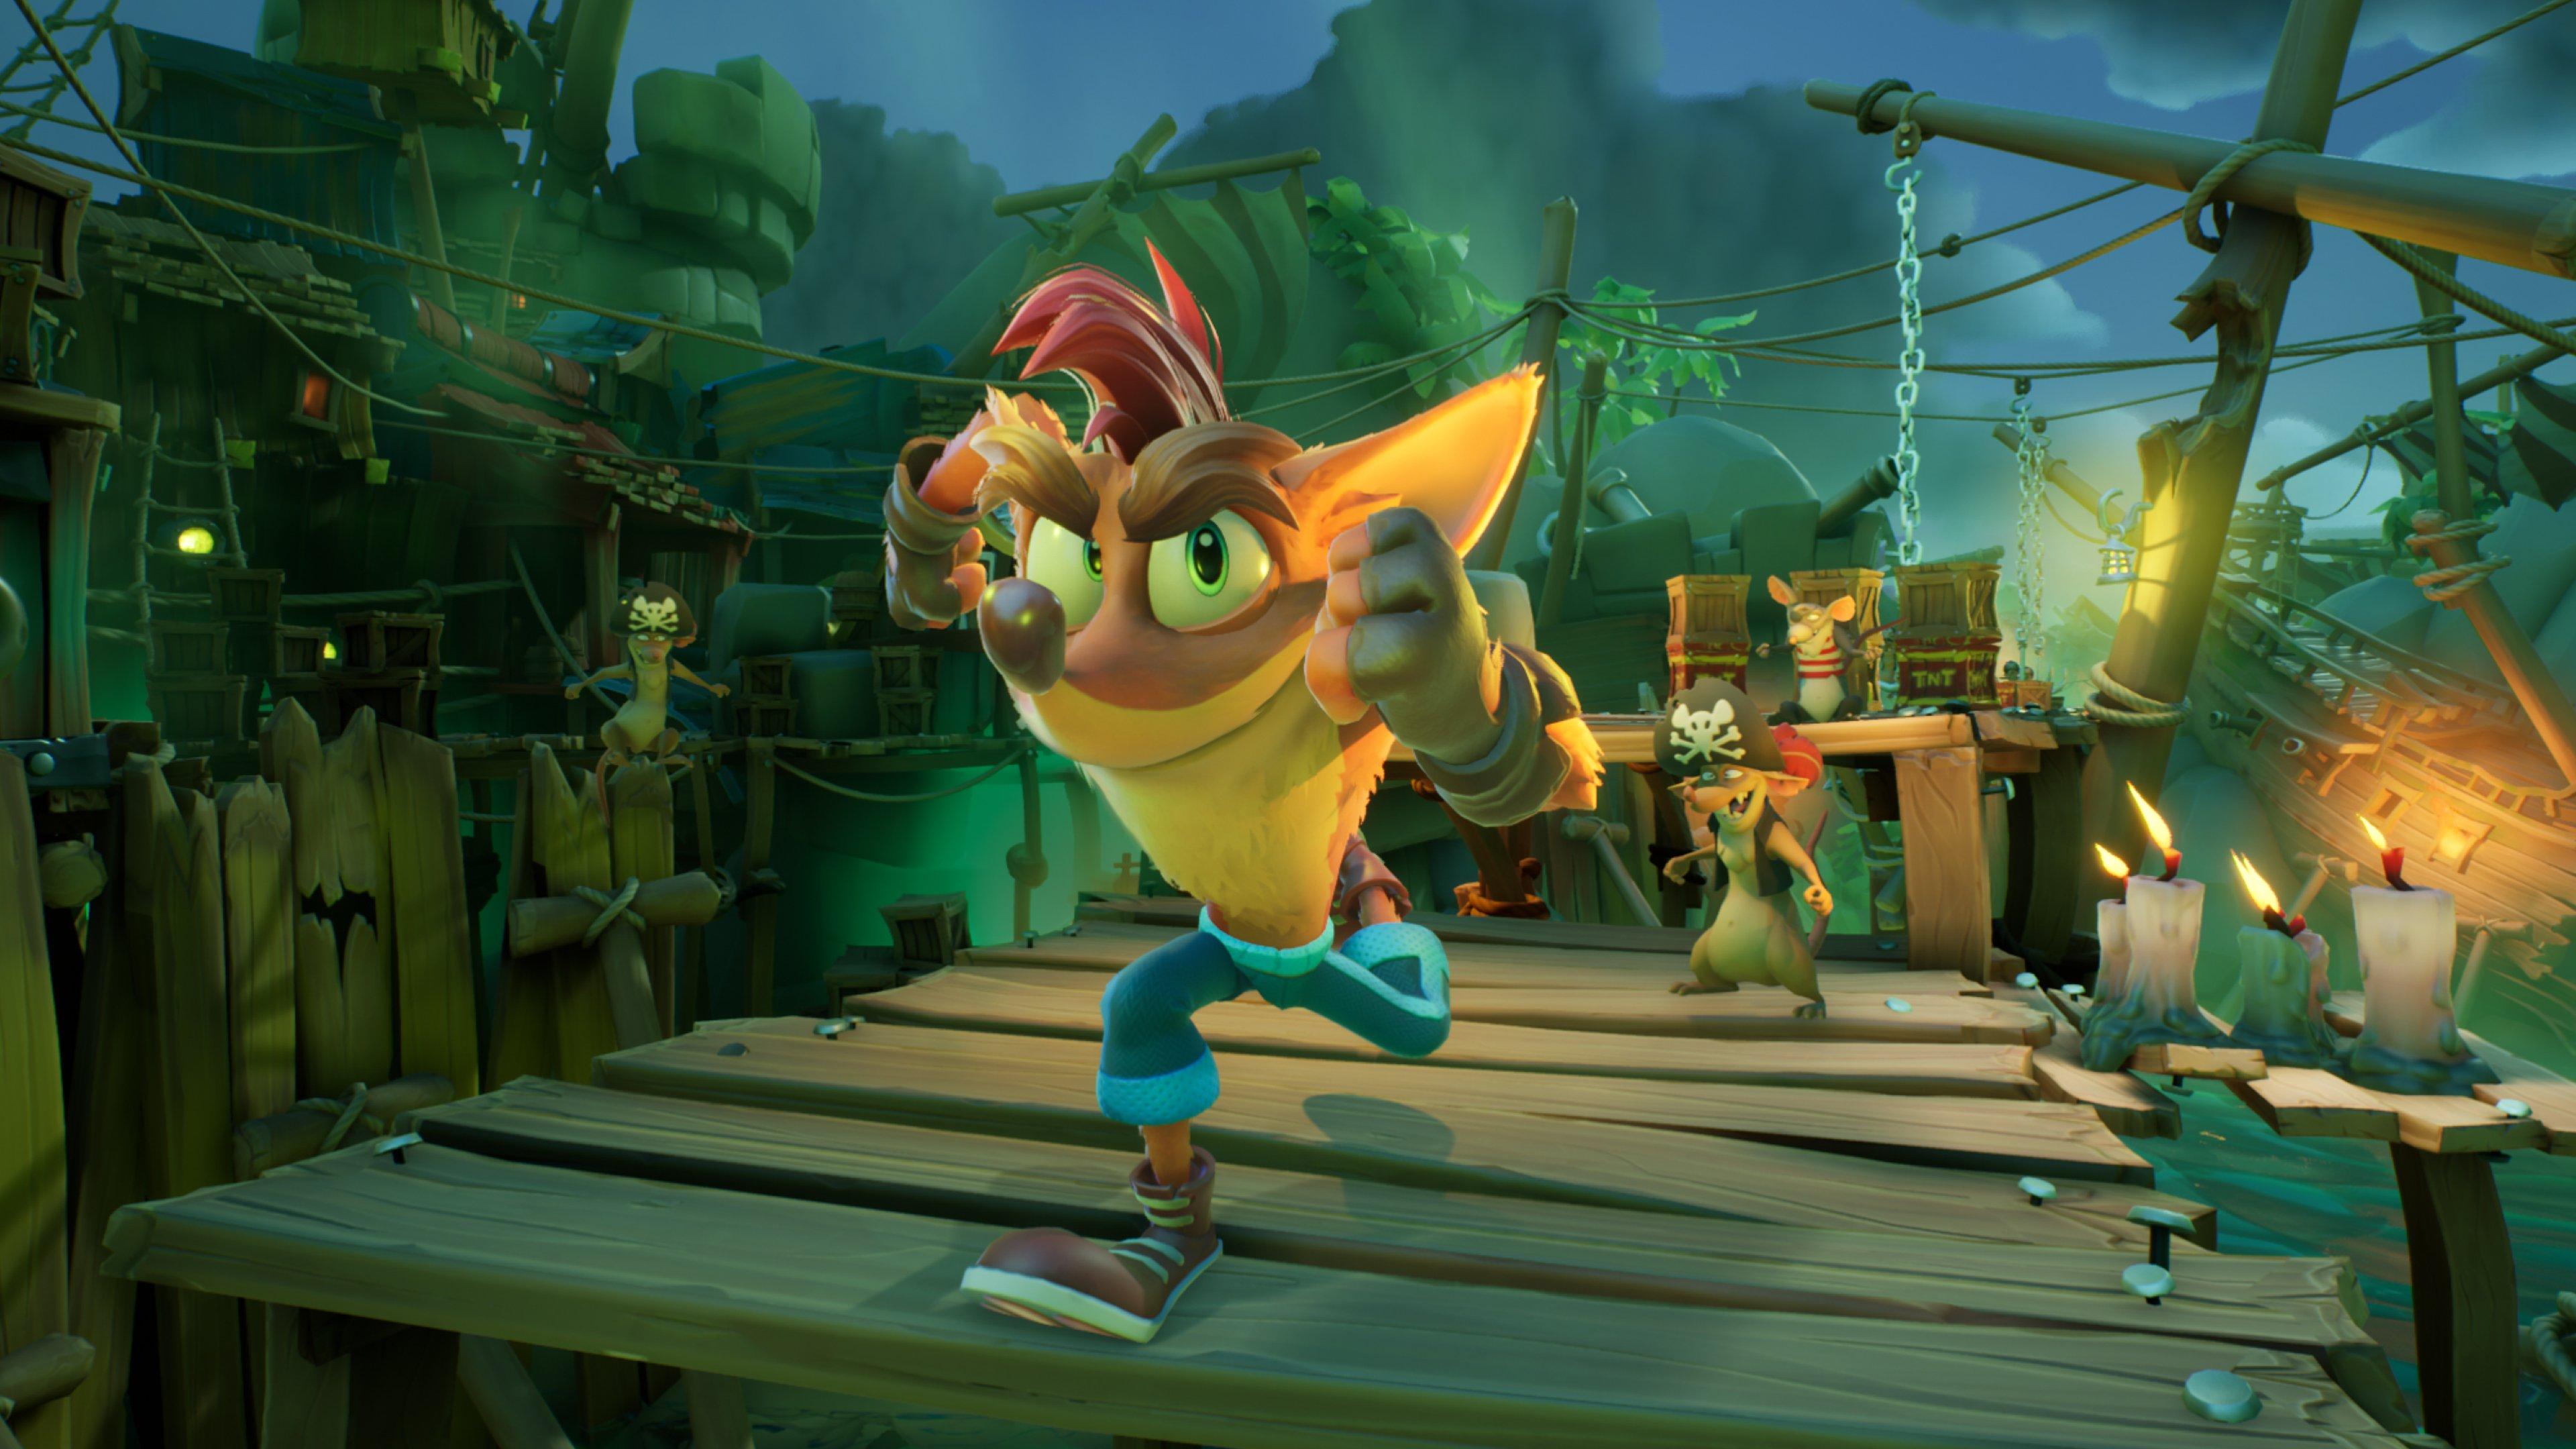 Crash Bandicoot 4: It's About Time - PS4, PlayStation 4